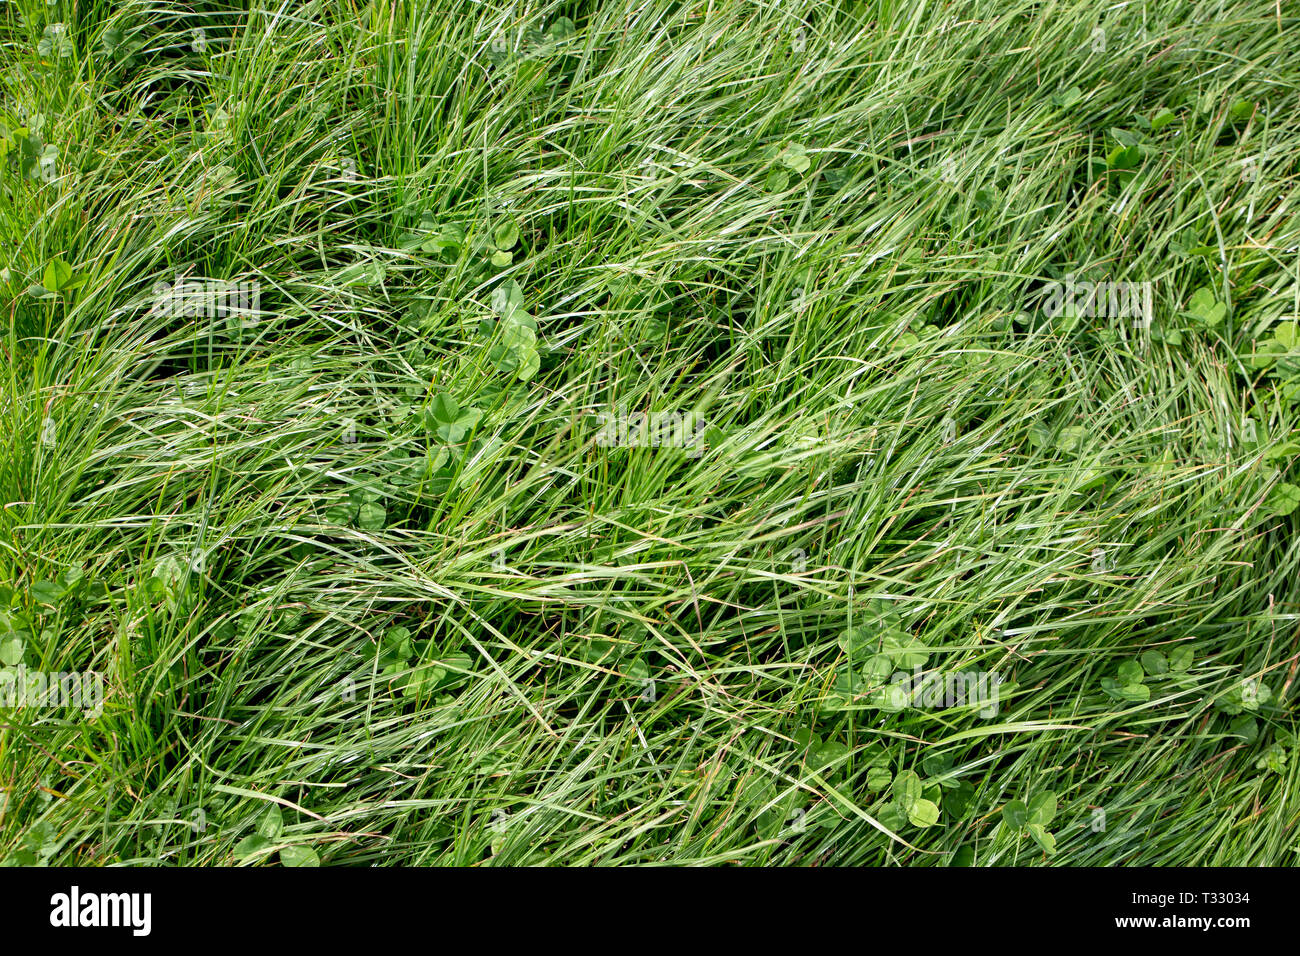 Perennial ryegrass and large leafed white clover grown by farmers for pasture, hay and stock feed in New Zealand Stock Photo